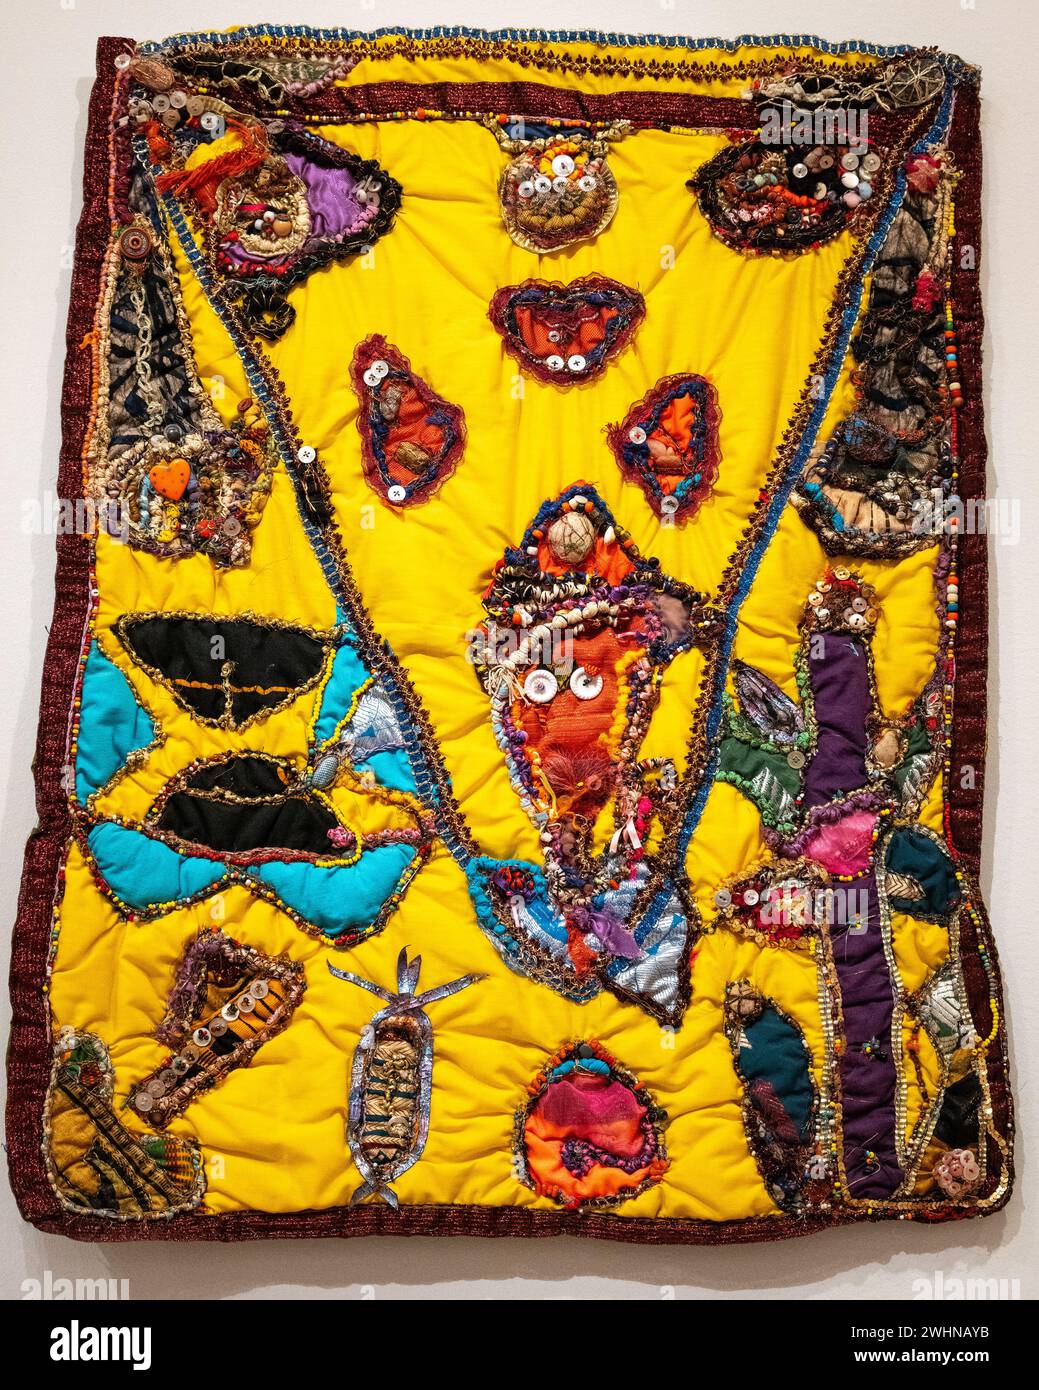 Elizabeth Talford Scott hand-sewn fabric art from 1996 called 'Person on a Swing' at the Baltimore Museum of Art Stock Photo